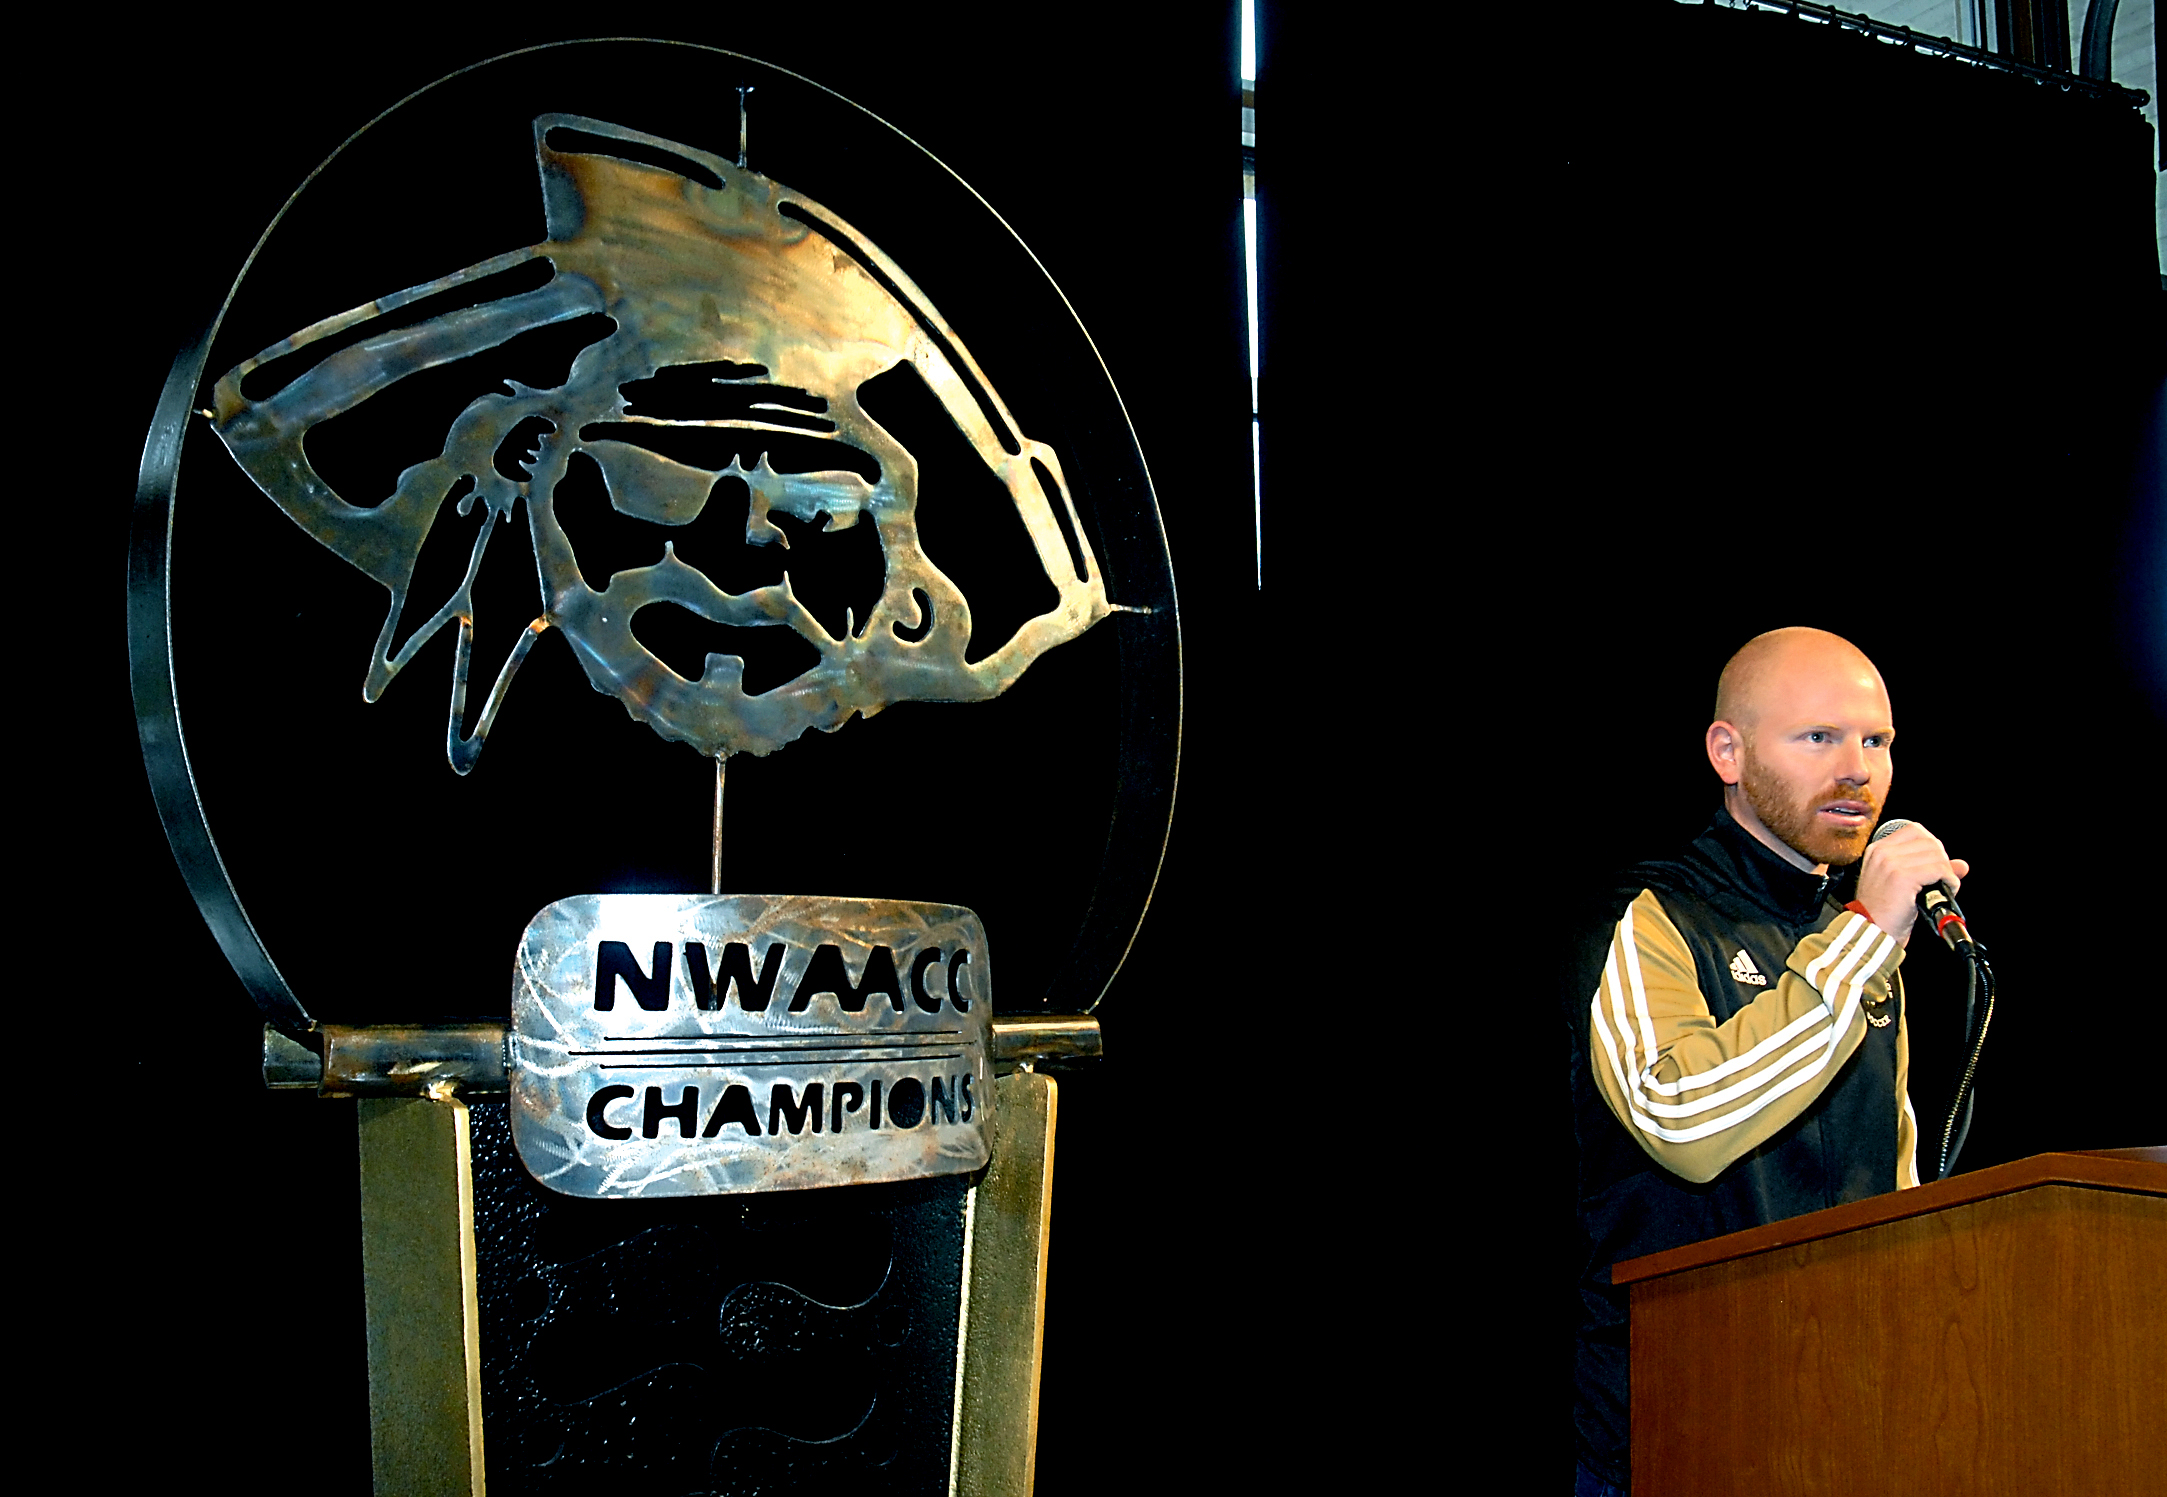 Peninsula College men's soccer coach Cale Rodriguez speaks about his team Wednesday during a celebration for the NWAC champion Pirates. Keith Thorpe/Peninsula Daily News